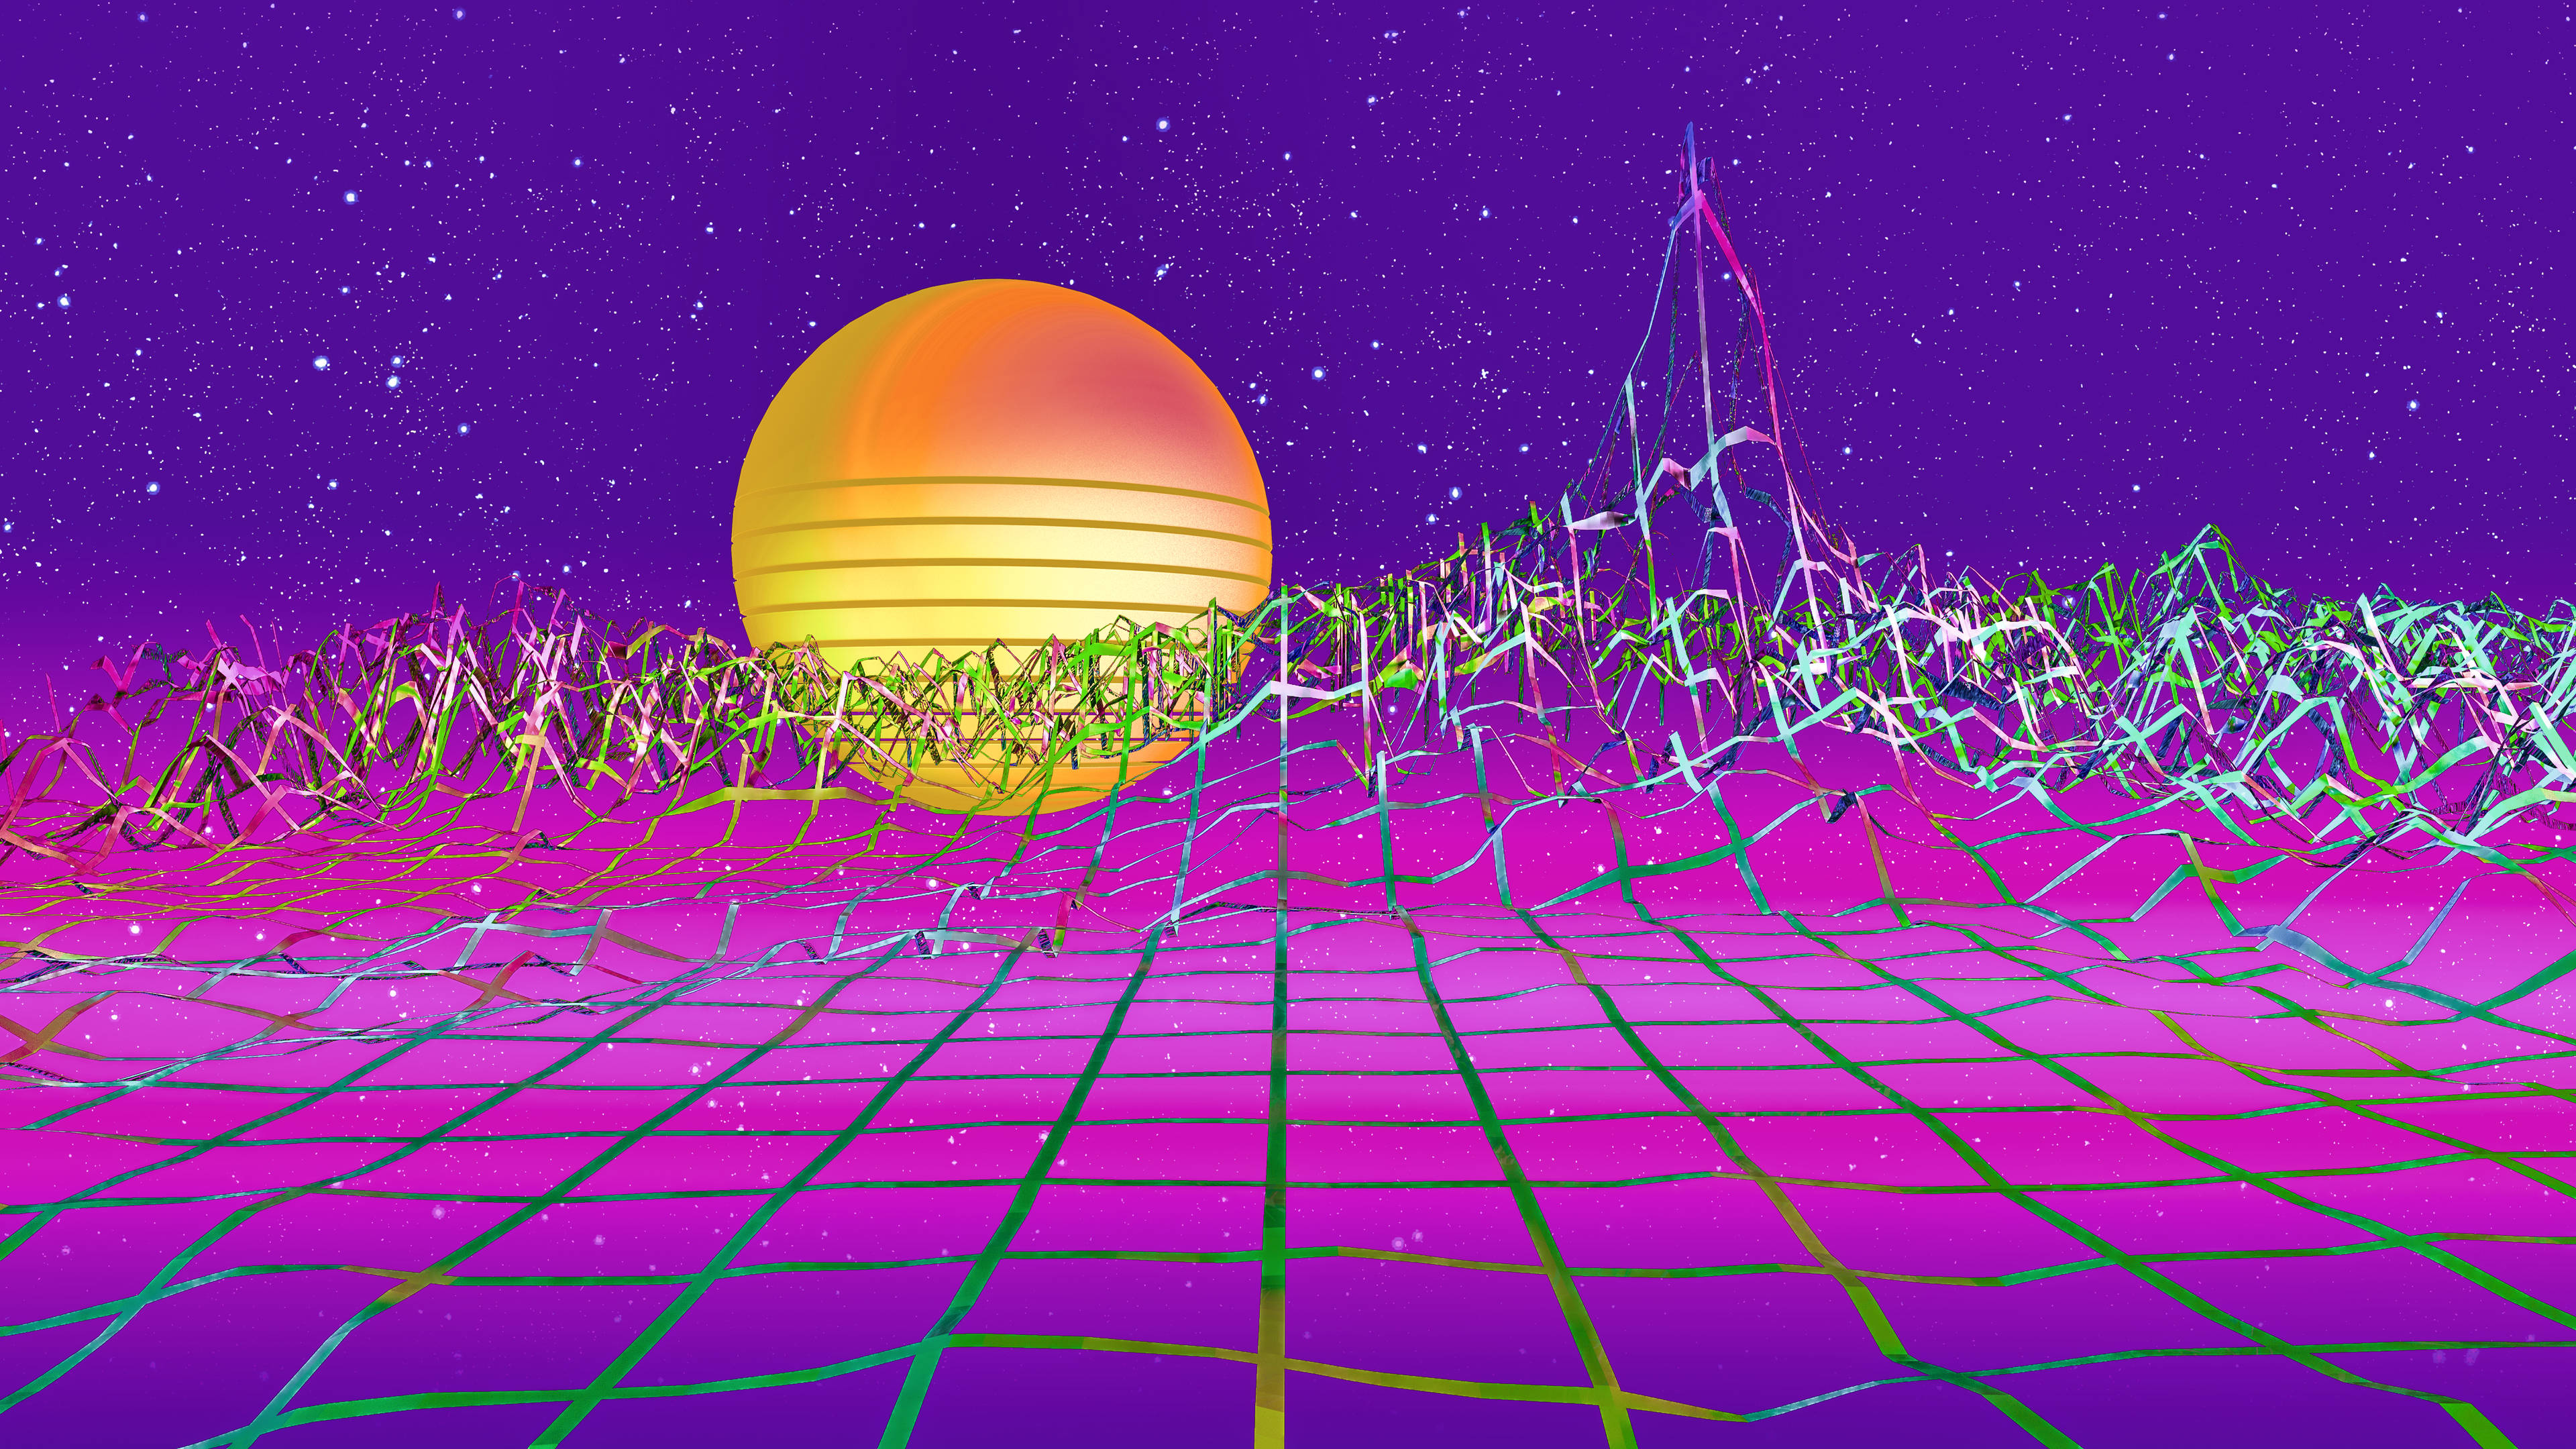 Sun In Retro Wave Mountains Wallpapers